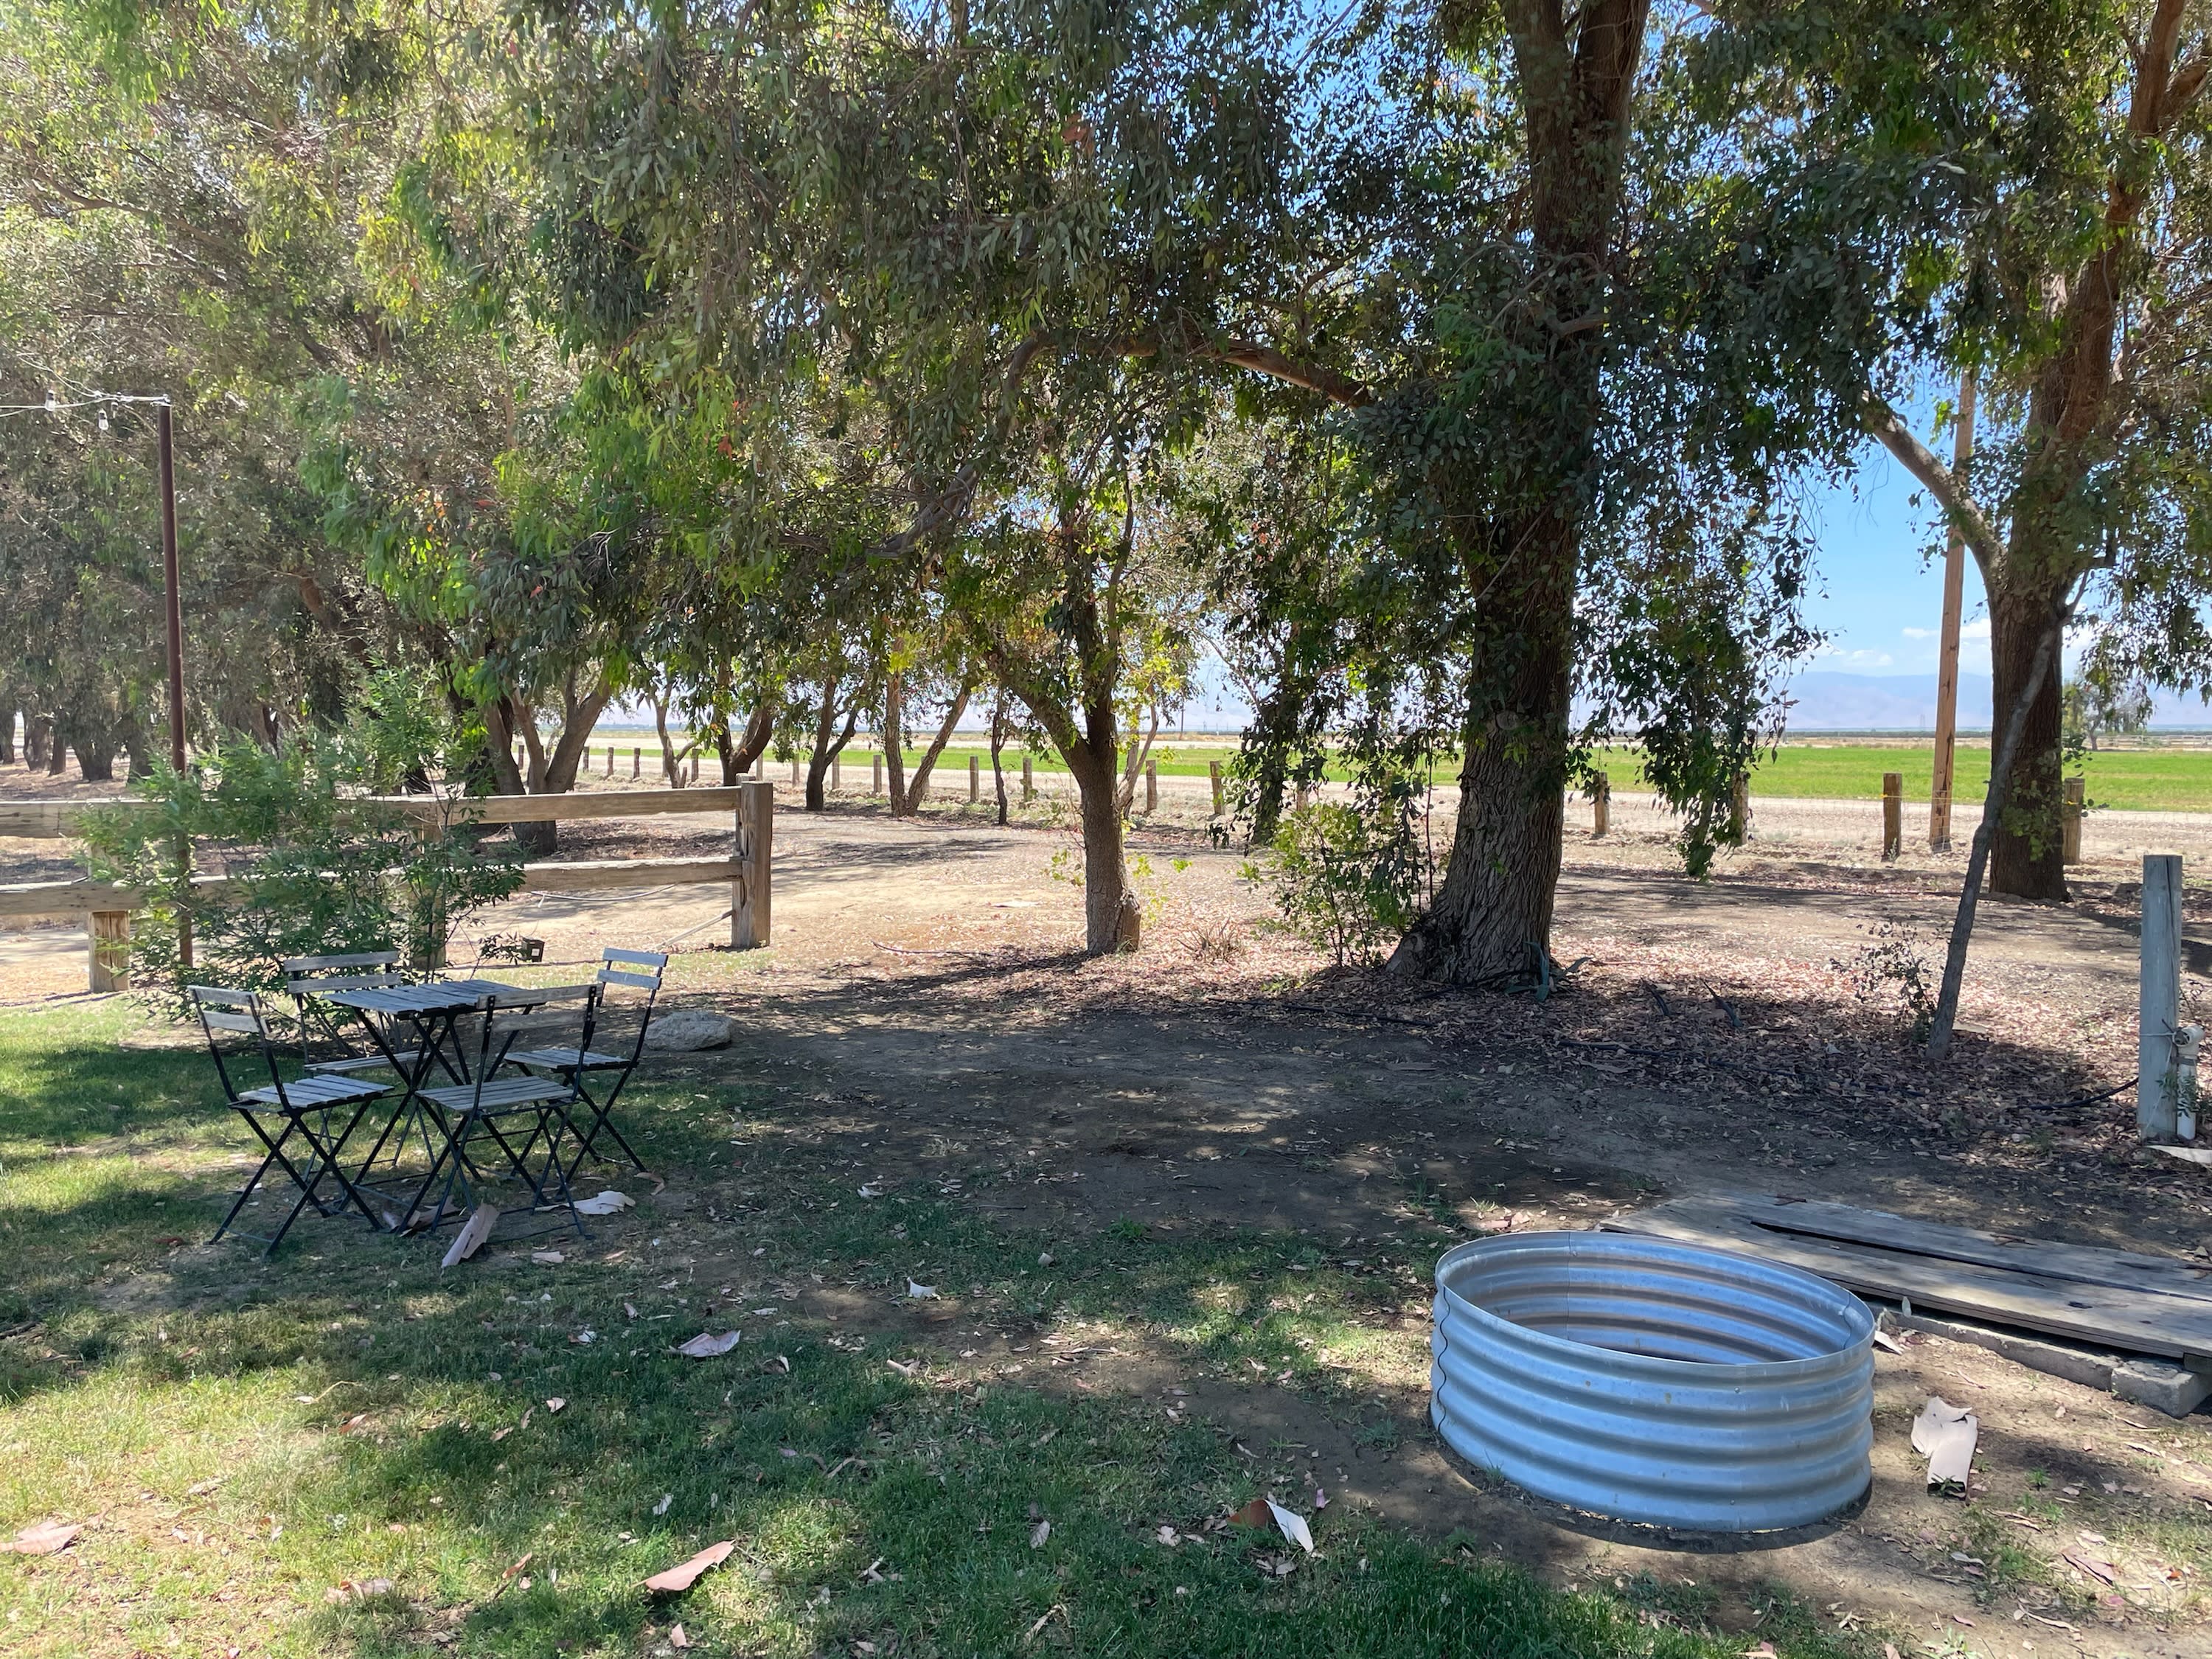 BYO Tent Site is shaded and includes bistro table & chairs, fire pit and water spigot